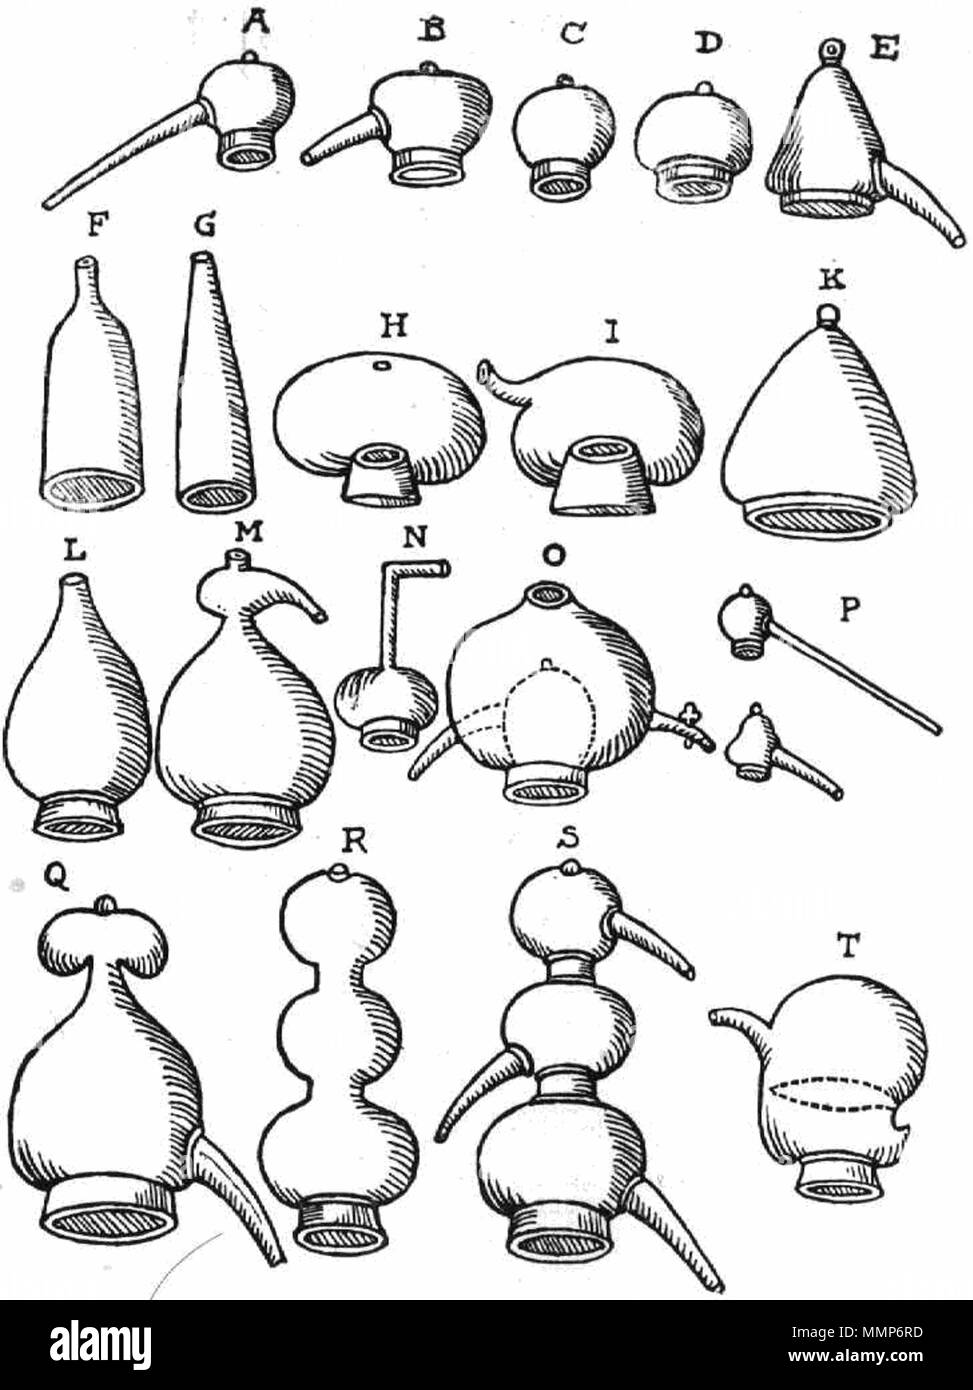 . English: Drawings of alembics from a Renaissance chemistry book by Andreas Libavius. These were glass and ceramic hoods for vessels used for distillation. The distillation vessel (called the 'cucurbit') would be heated by a flame, the liquid inside would boil and the vapor would rise into the alembic, where it would condense by contact with the cool glass walls and run down the spout into a receiving container. Alembics were invented during the Middle Ages for use in alchemy, the protoscientific precursor to chemistry. Alembics from Andreas Libavius Alchymia Stock Photo